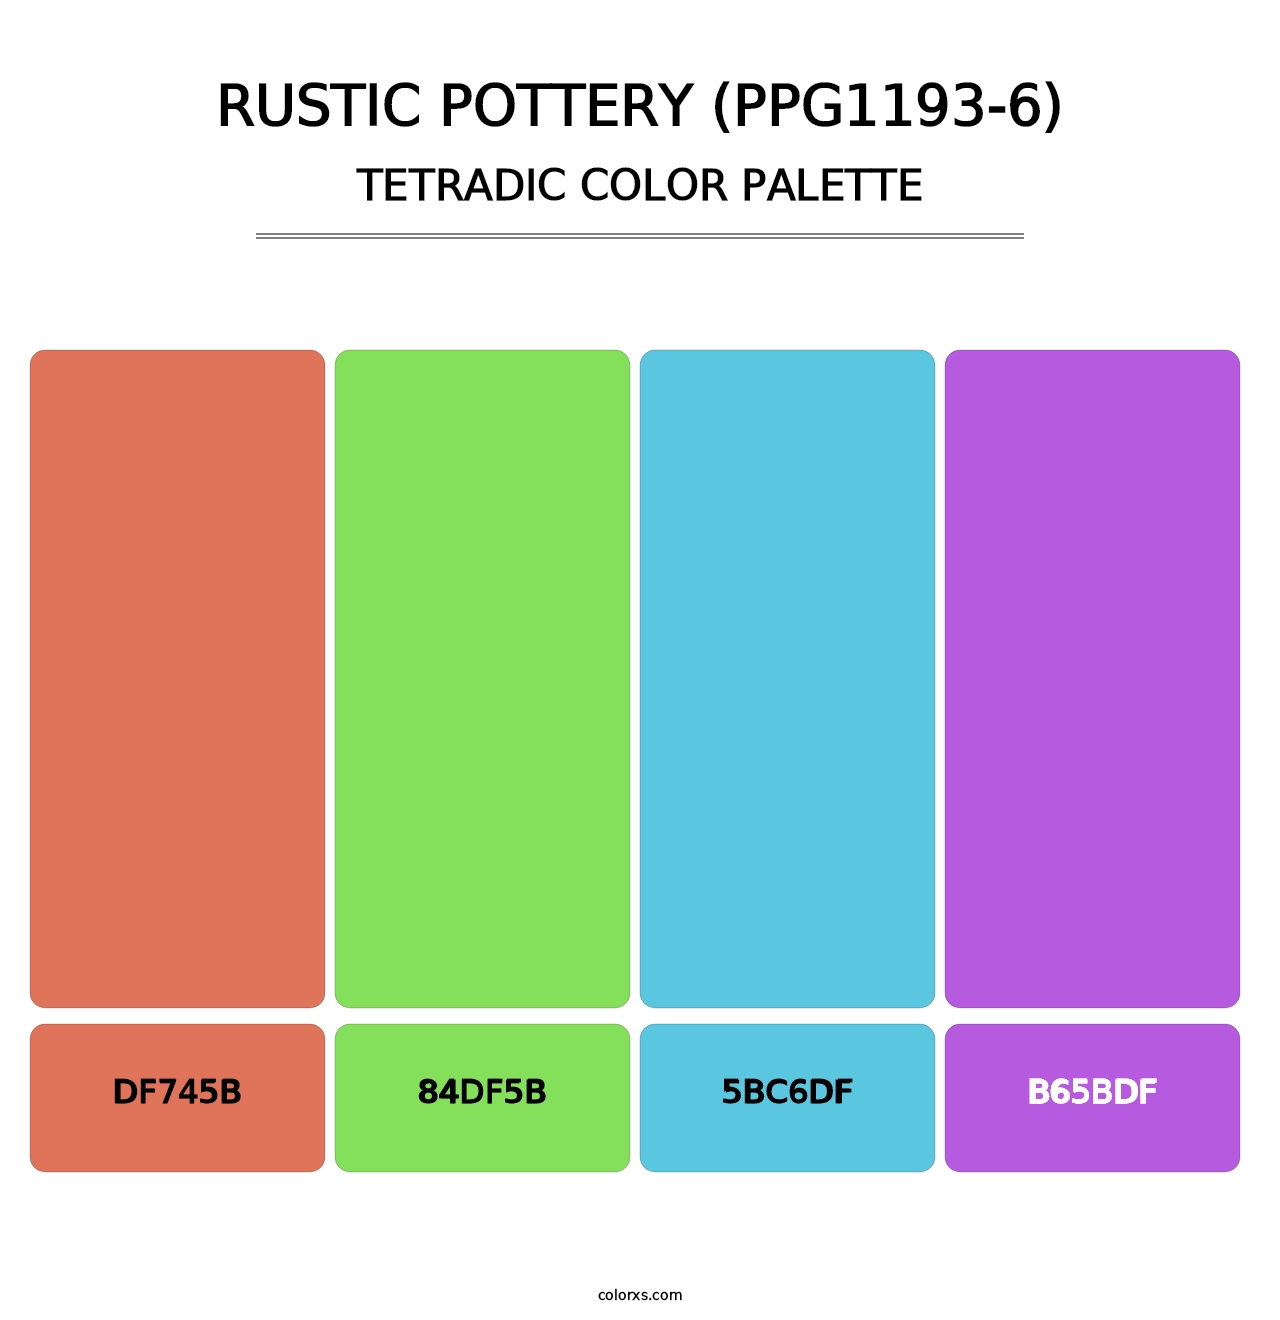 Rustic Pottery (PPG1193-6) - Tetradic Color Palette